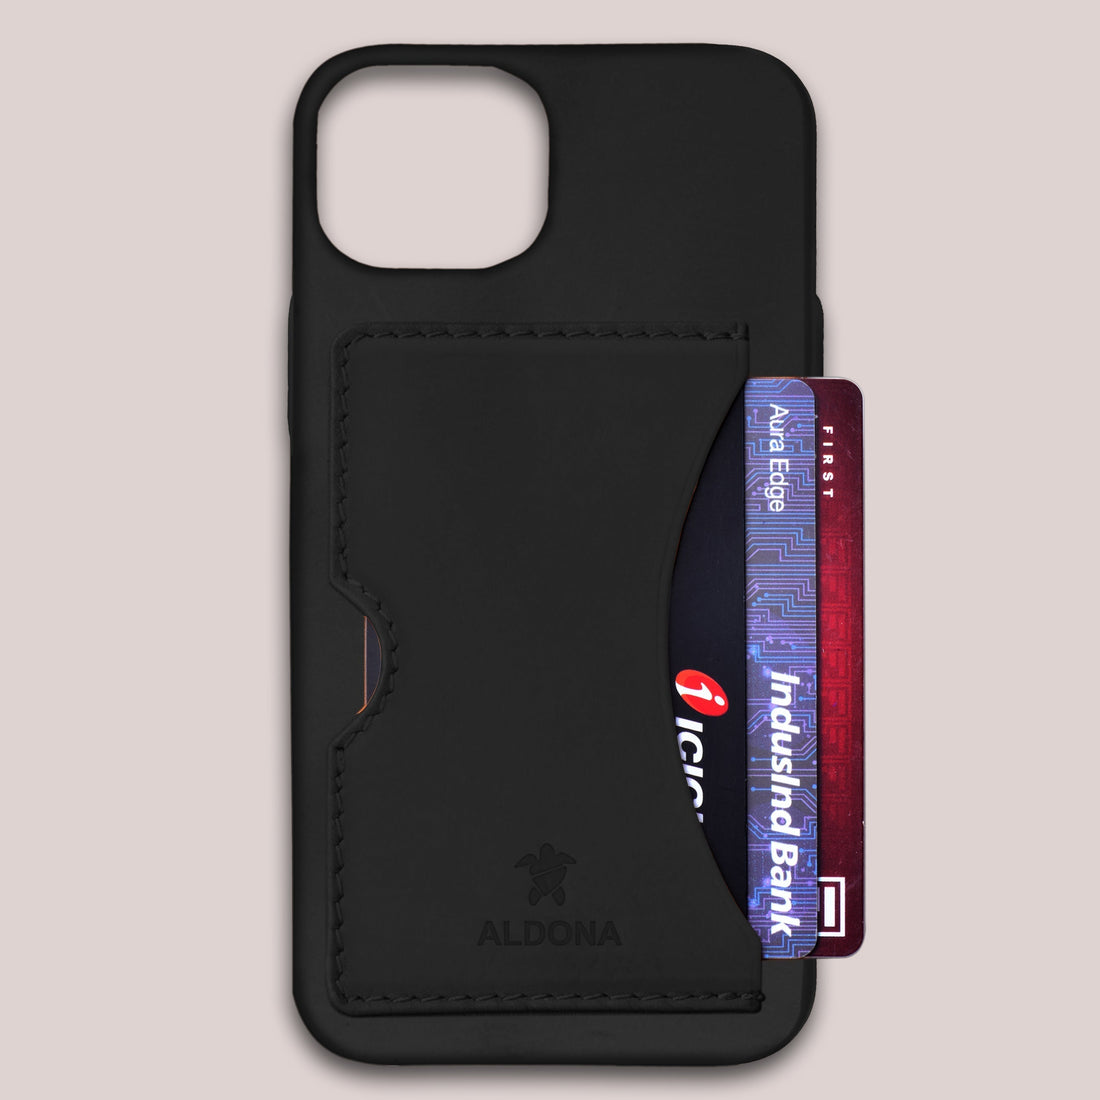 Baxter Card Case for iPhone 14 series - Burnt Tobacco